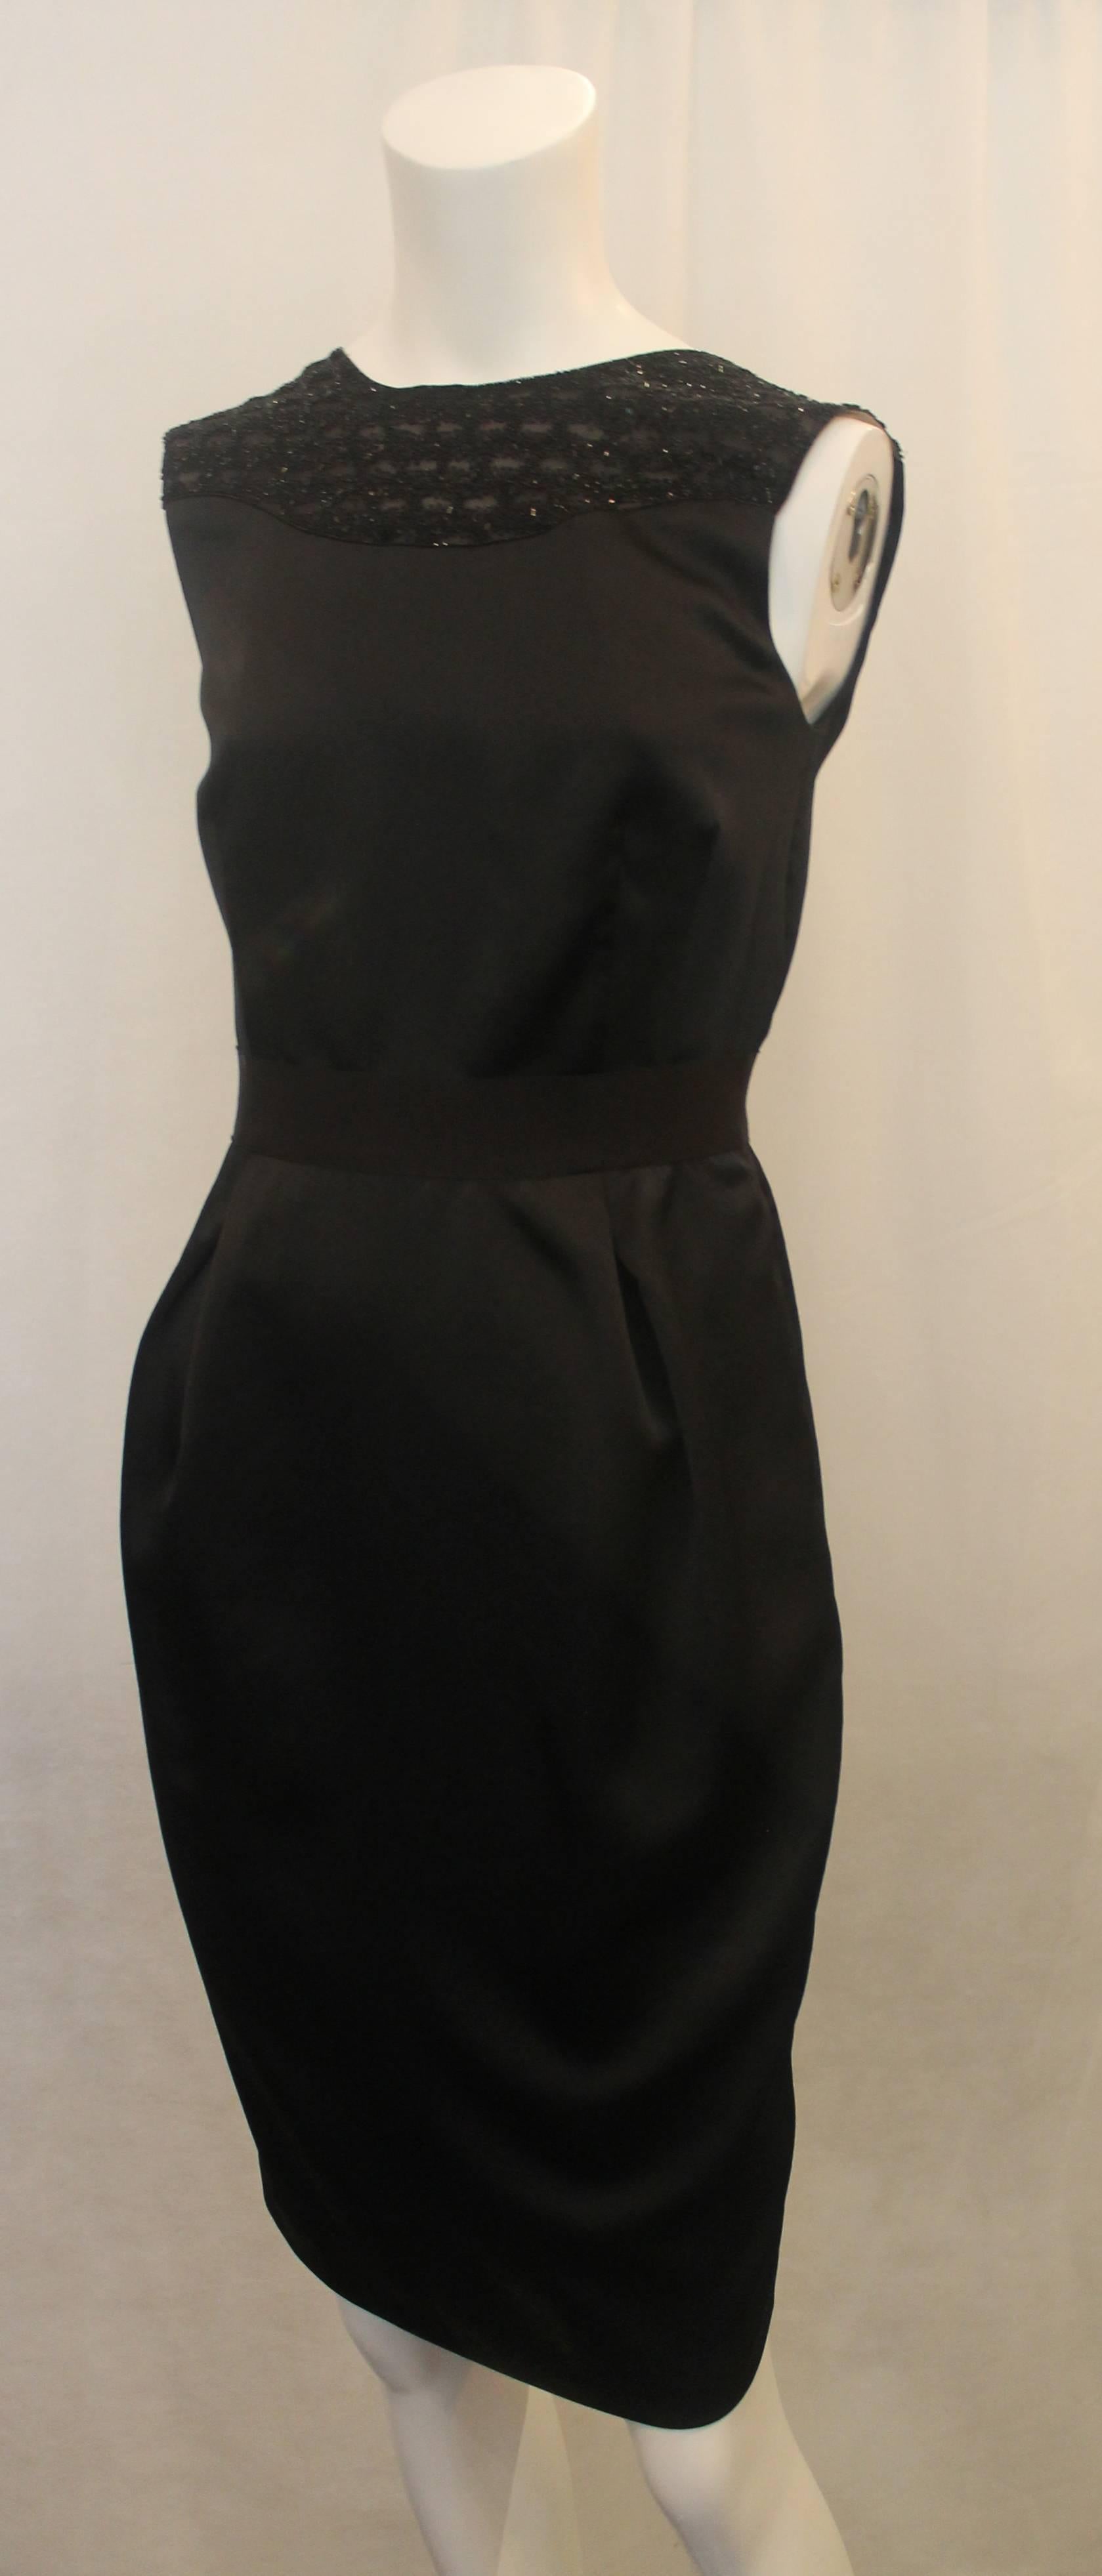 Valentino Black Sleeveless Tapered Dress with Beading Silk Dress - S. This beautiful sleeveless dress is tapered, has 2 front pleats, and a grosgrain ribbon by the waist. The upper back has an open v-shape. The neckline is sheer fabric with beading.